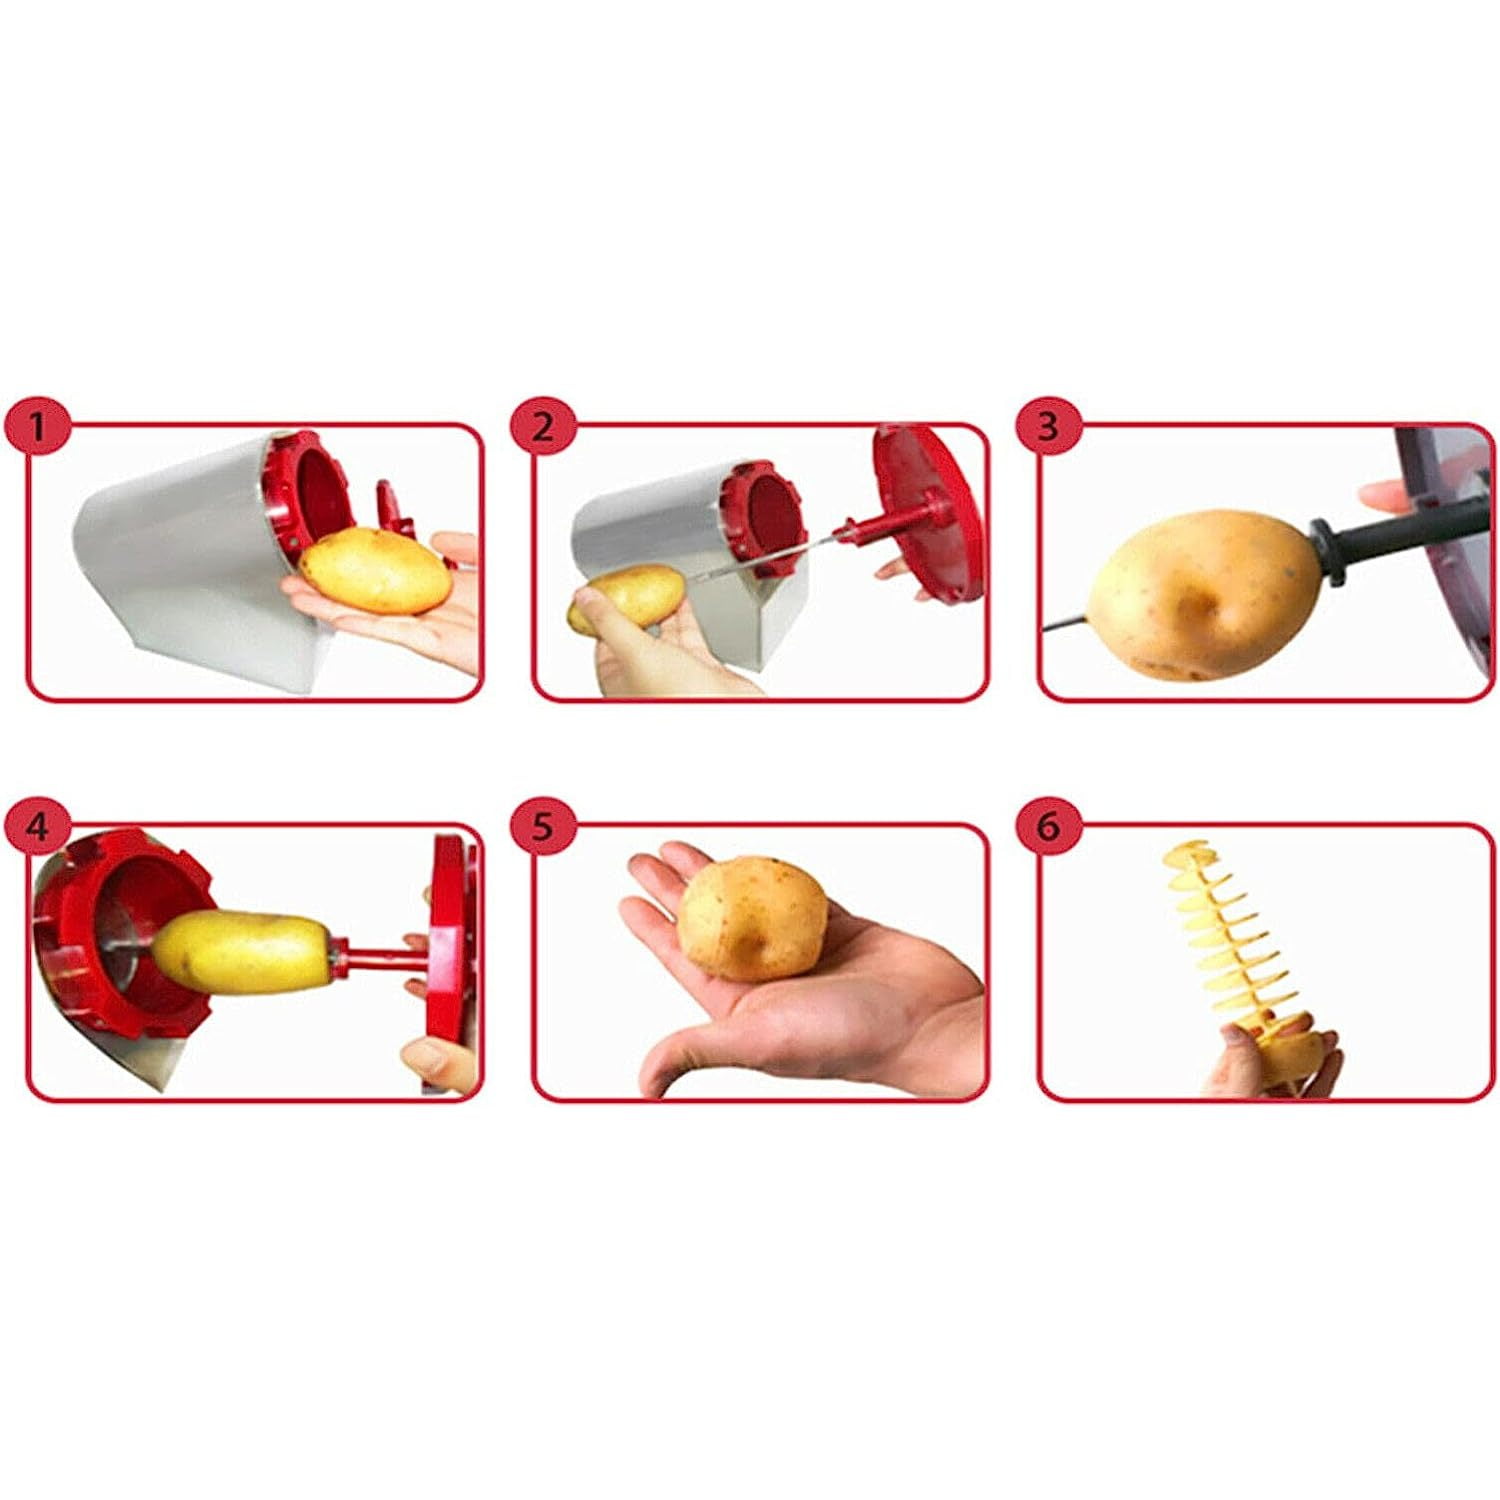 CGOLDENWALL 3 in 1 Electric Tornado Potato Slicer Spiral Potato Cutter  Twisted Potato Slicer Spiral Twister Cutter Thicker Stainless Steel  Vegetables